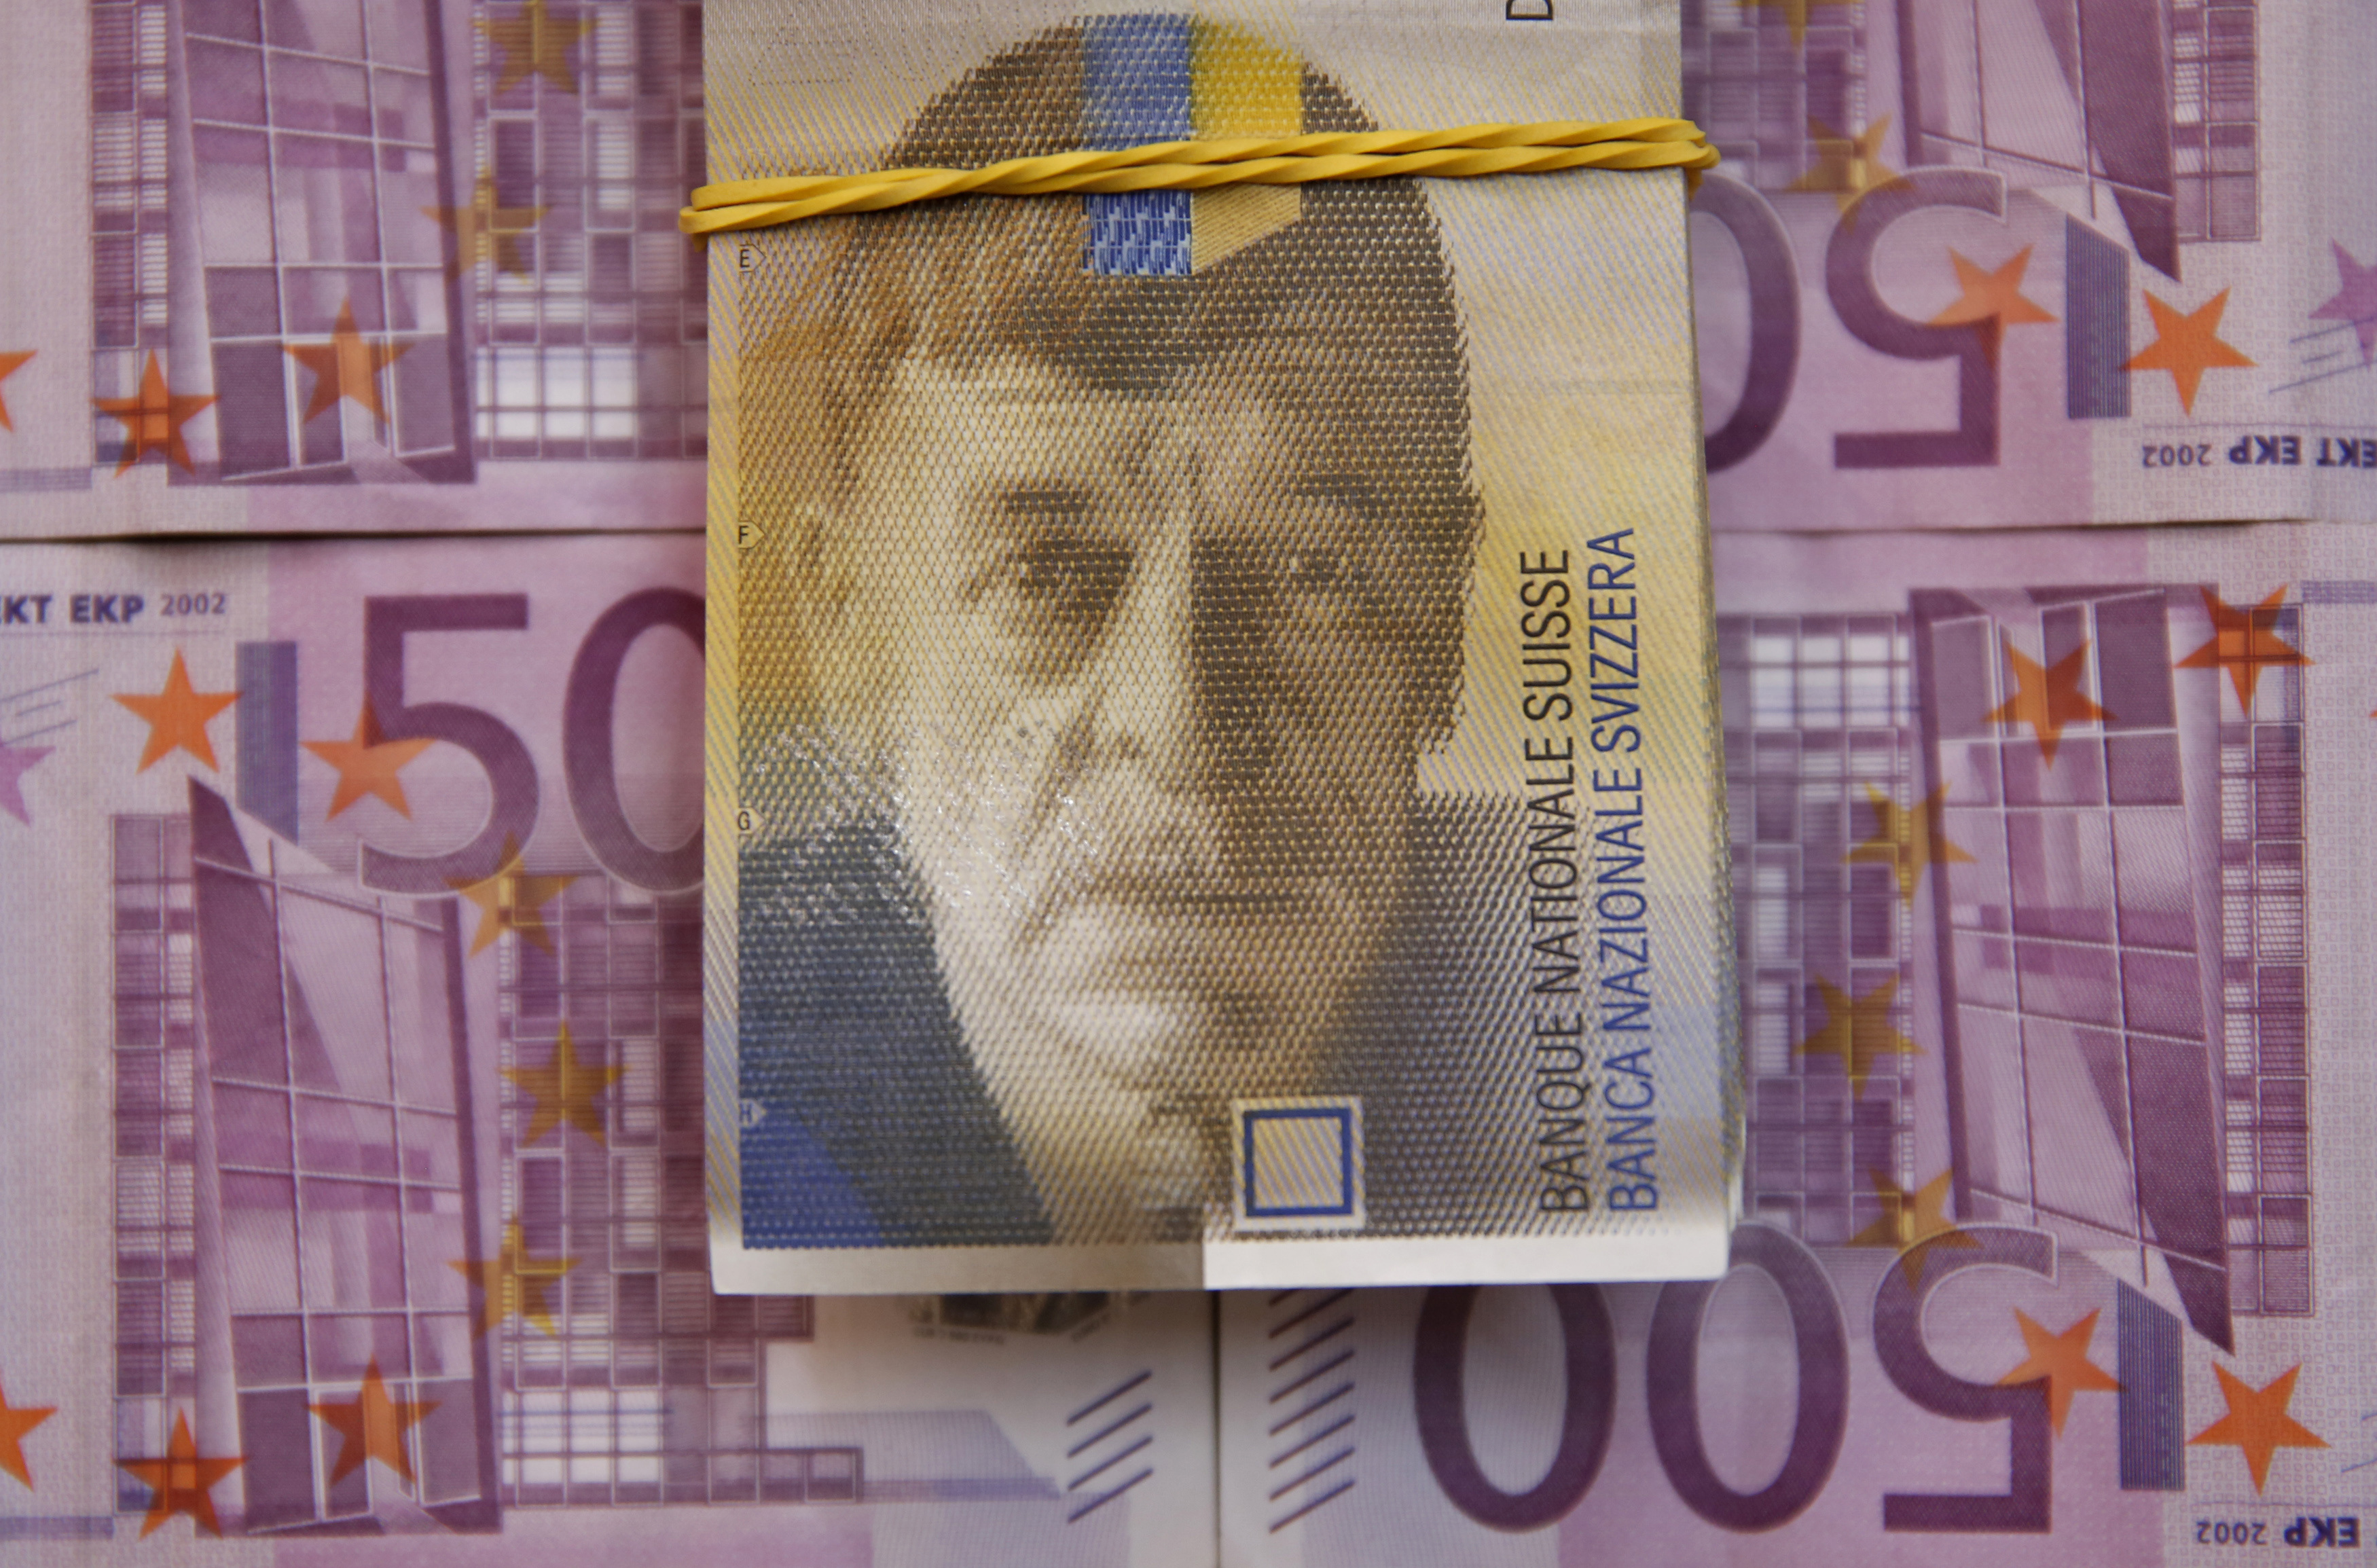 A picture illustration of Swiss Franc and Euro banknotes taken in central Bosnian town of Zenica